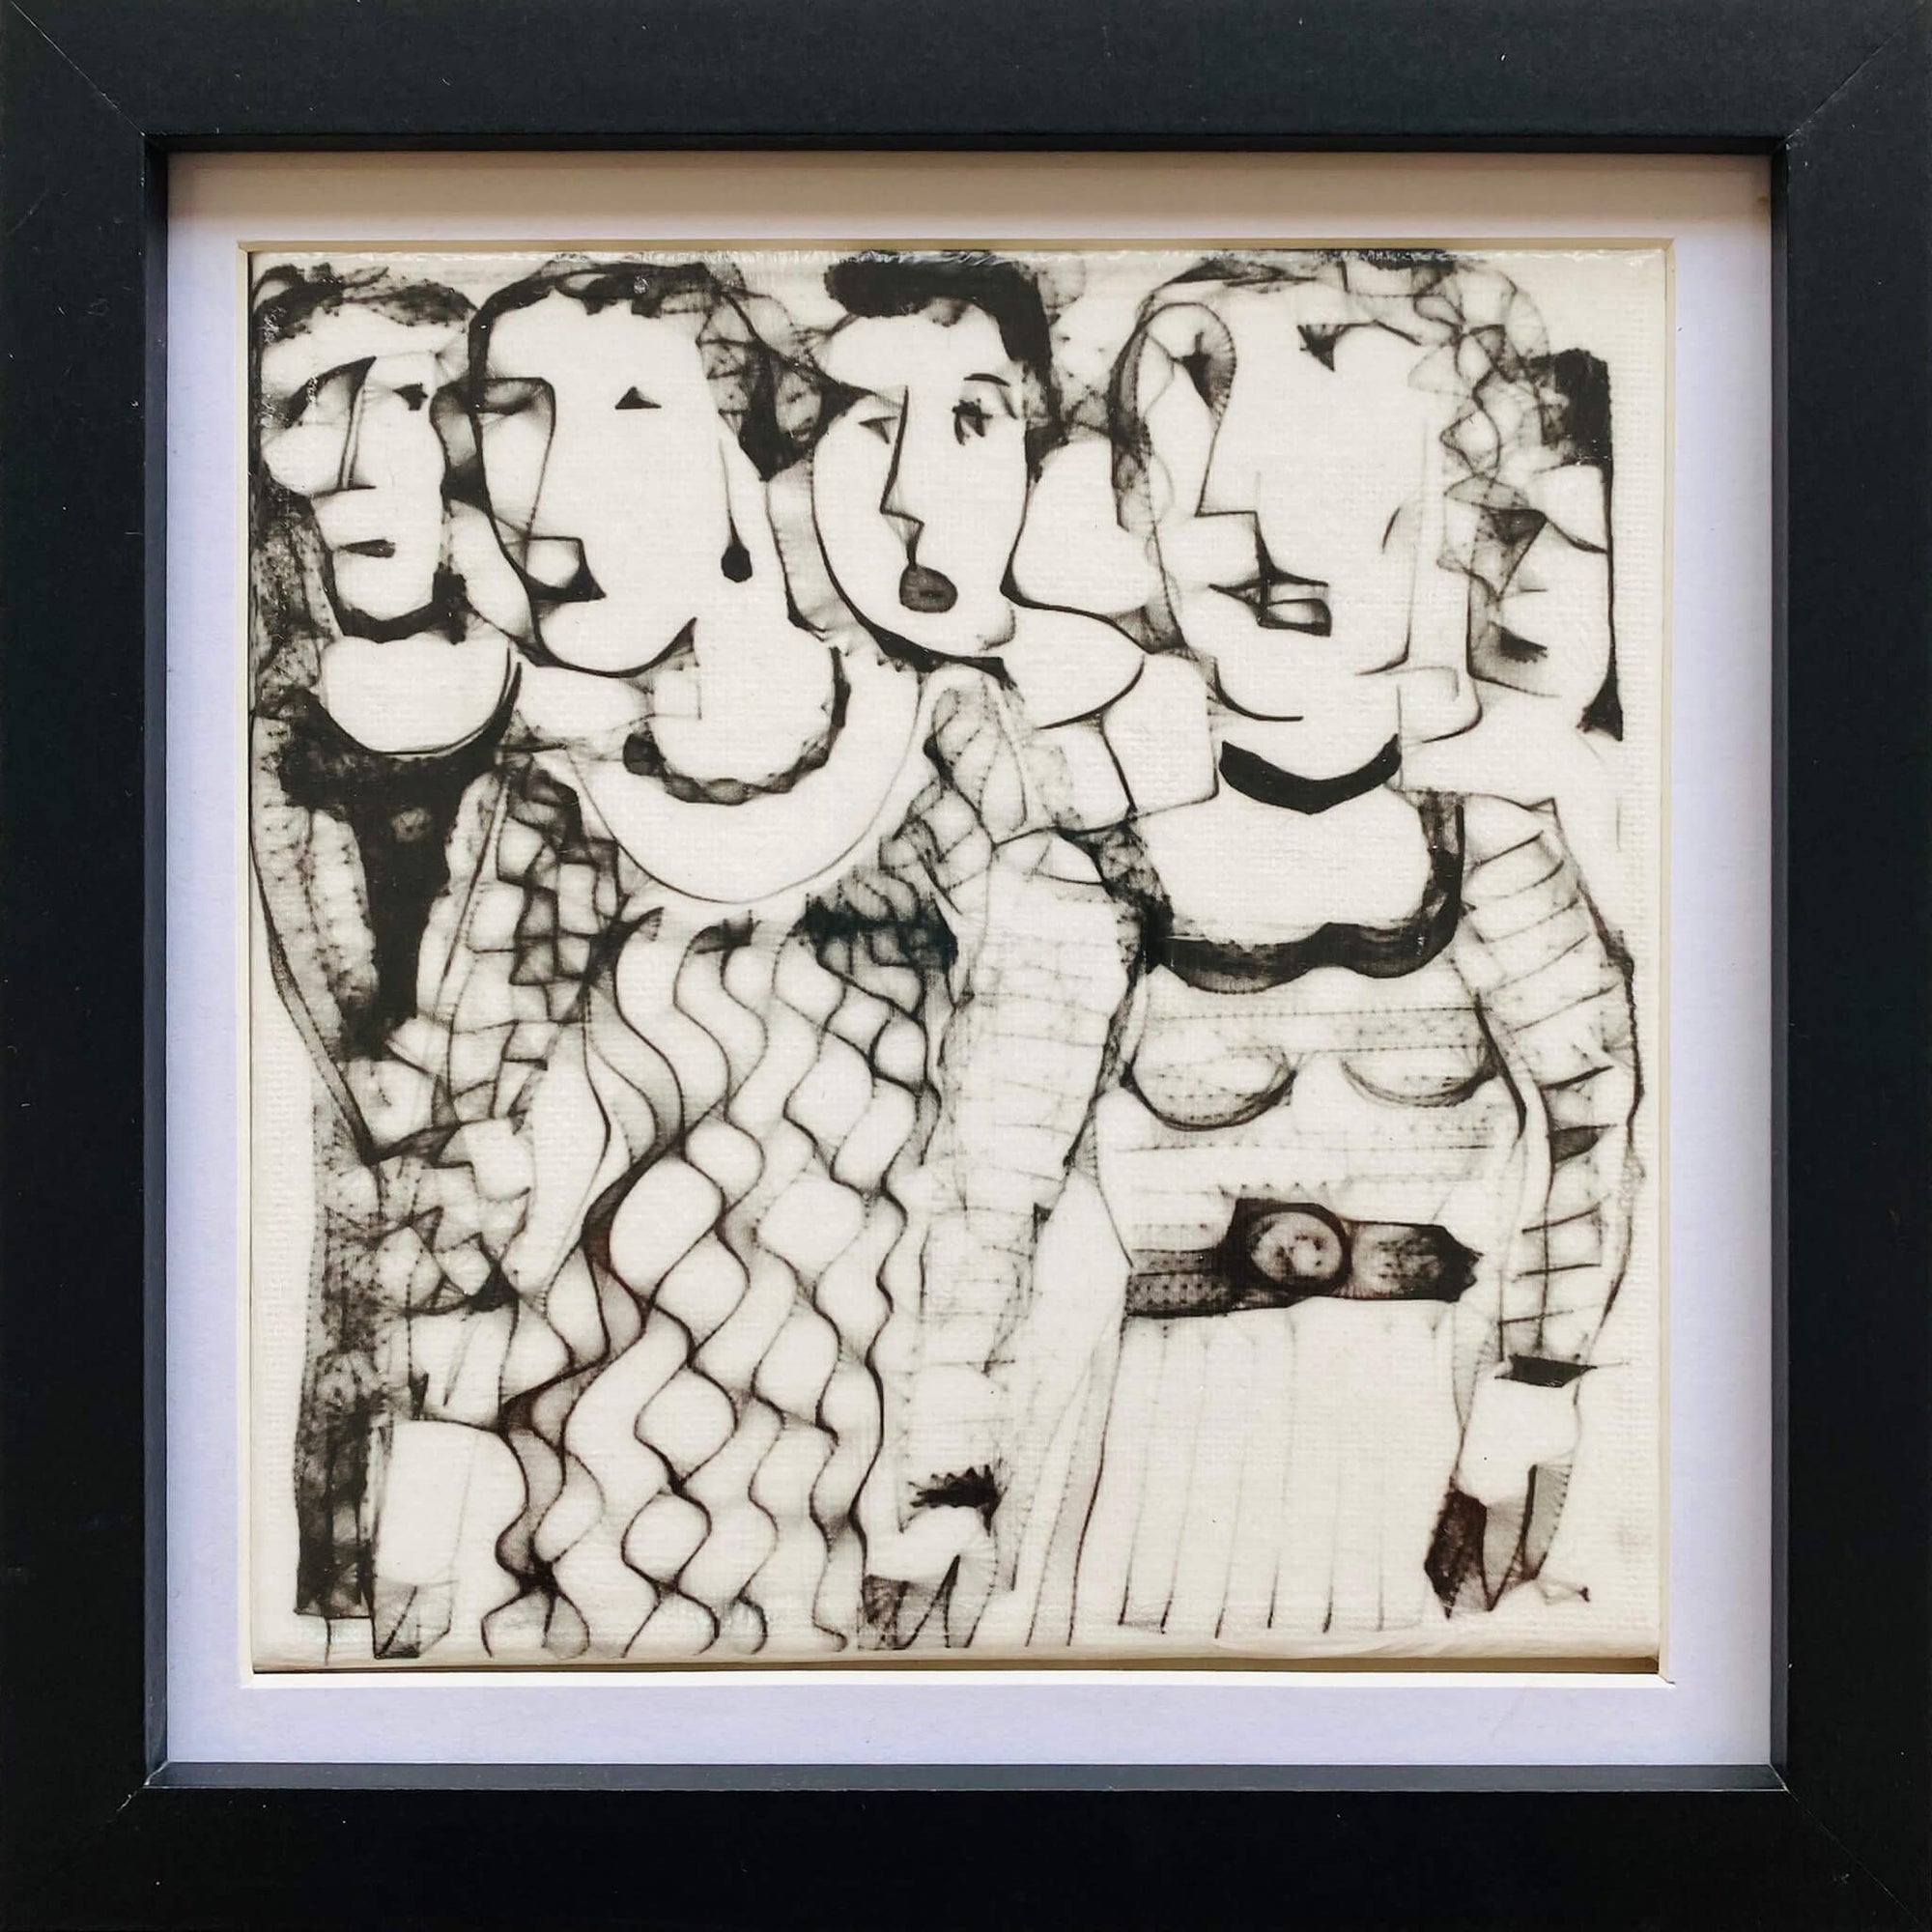 Rampaging Women by Heather Tobias is a one of a kind porcelain framed handmade glazed tile comprising an original drawing